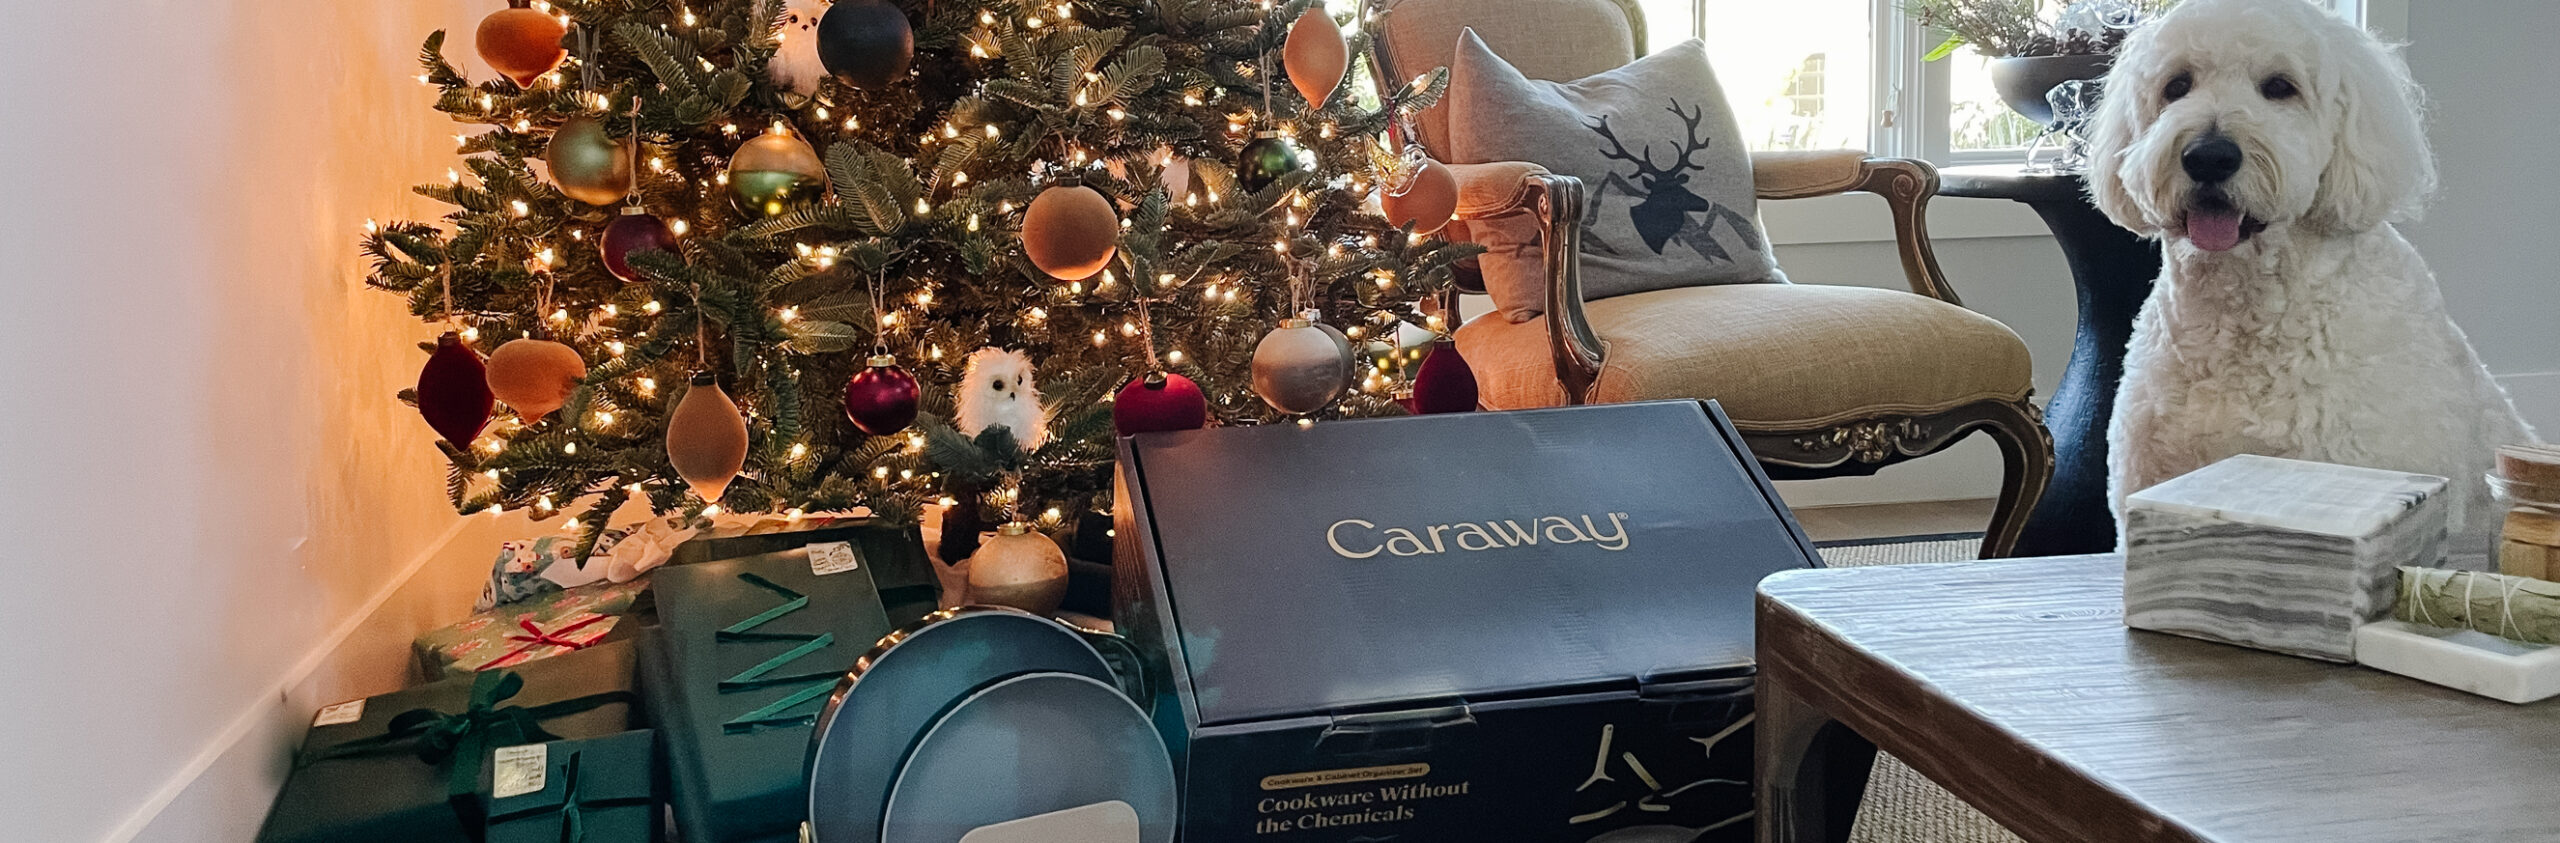 Beautiful black and gold Caraway cookware set under the Christmas tree